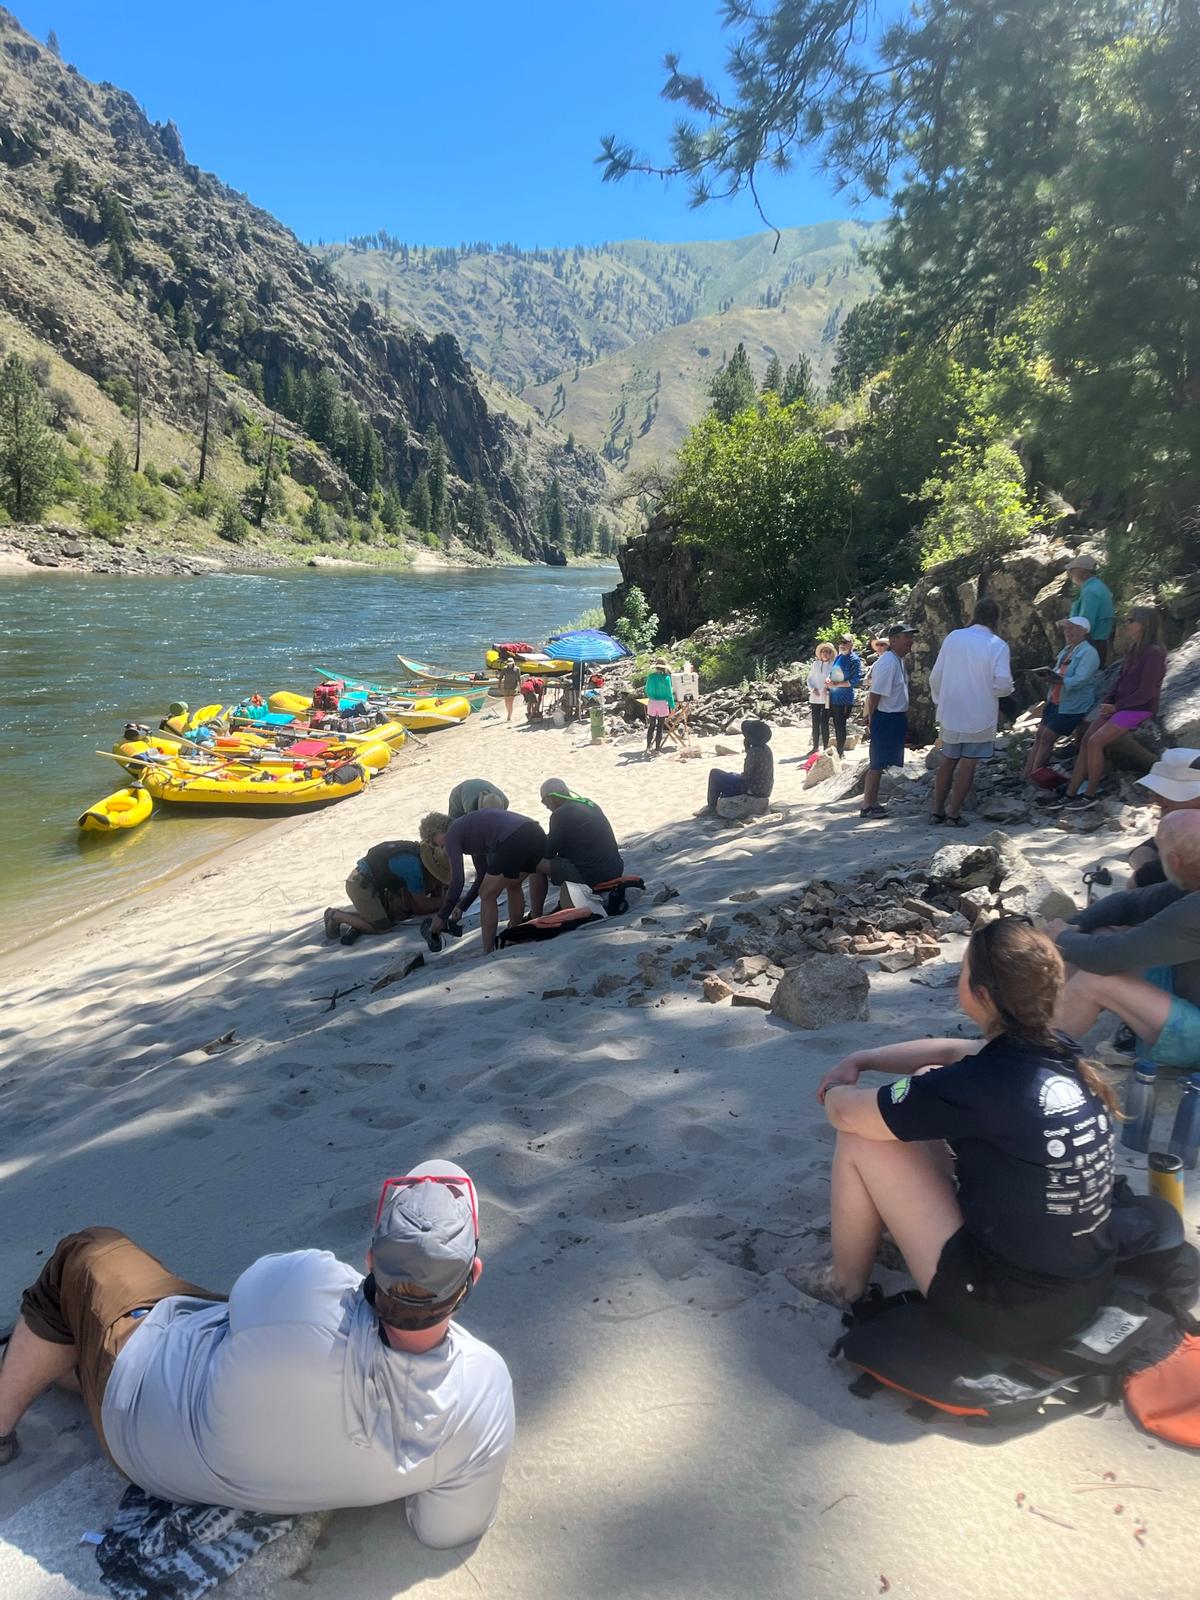 Relaxing on the shores of the Main Salmon River in Idaho. (Andy Yemma)